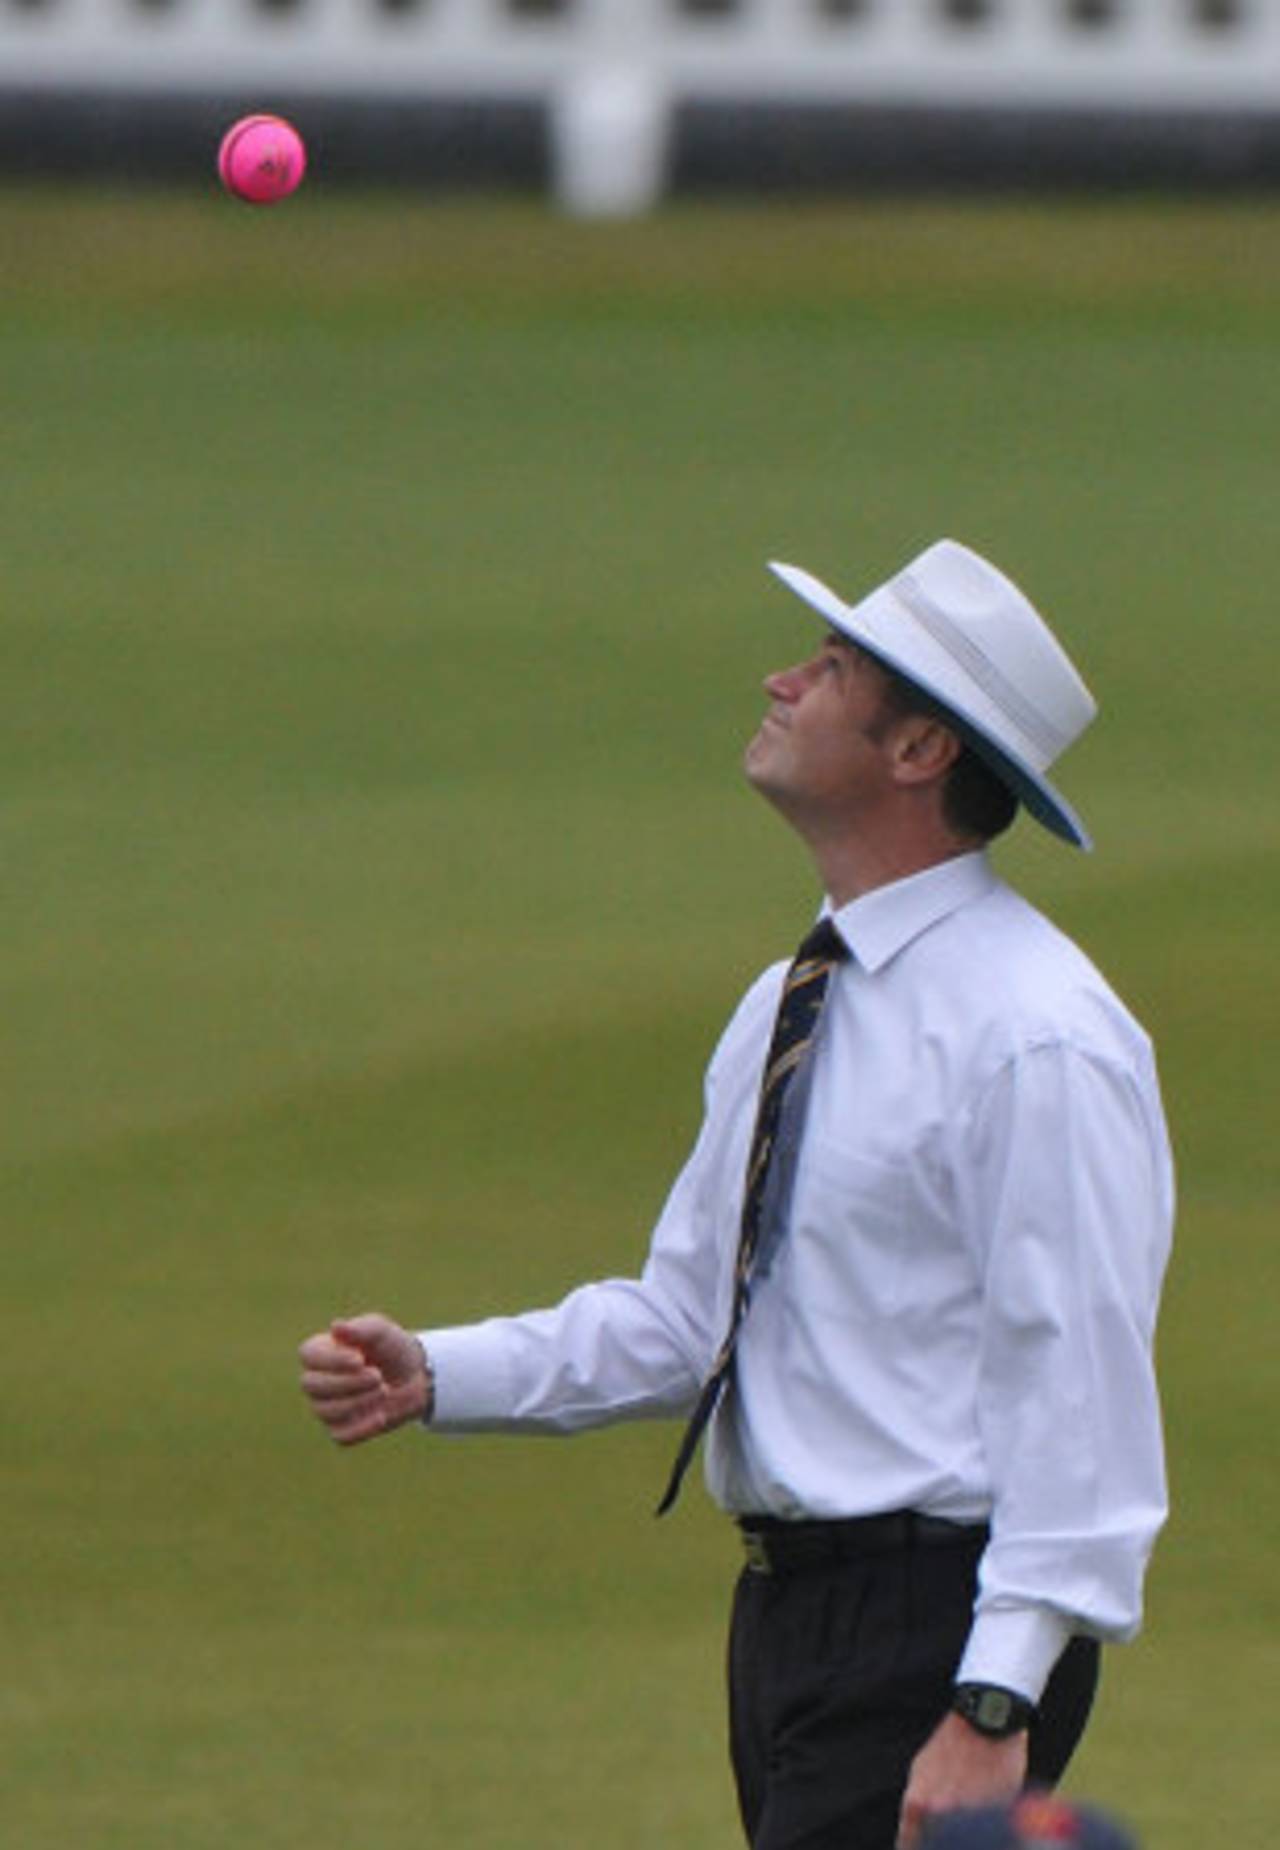 Simon Taufel with a prototype pink ball, Lord's, May 13, 2009